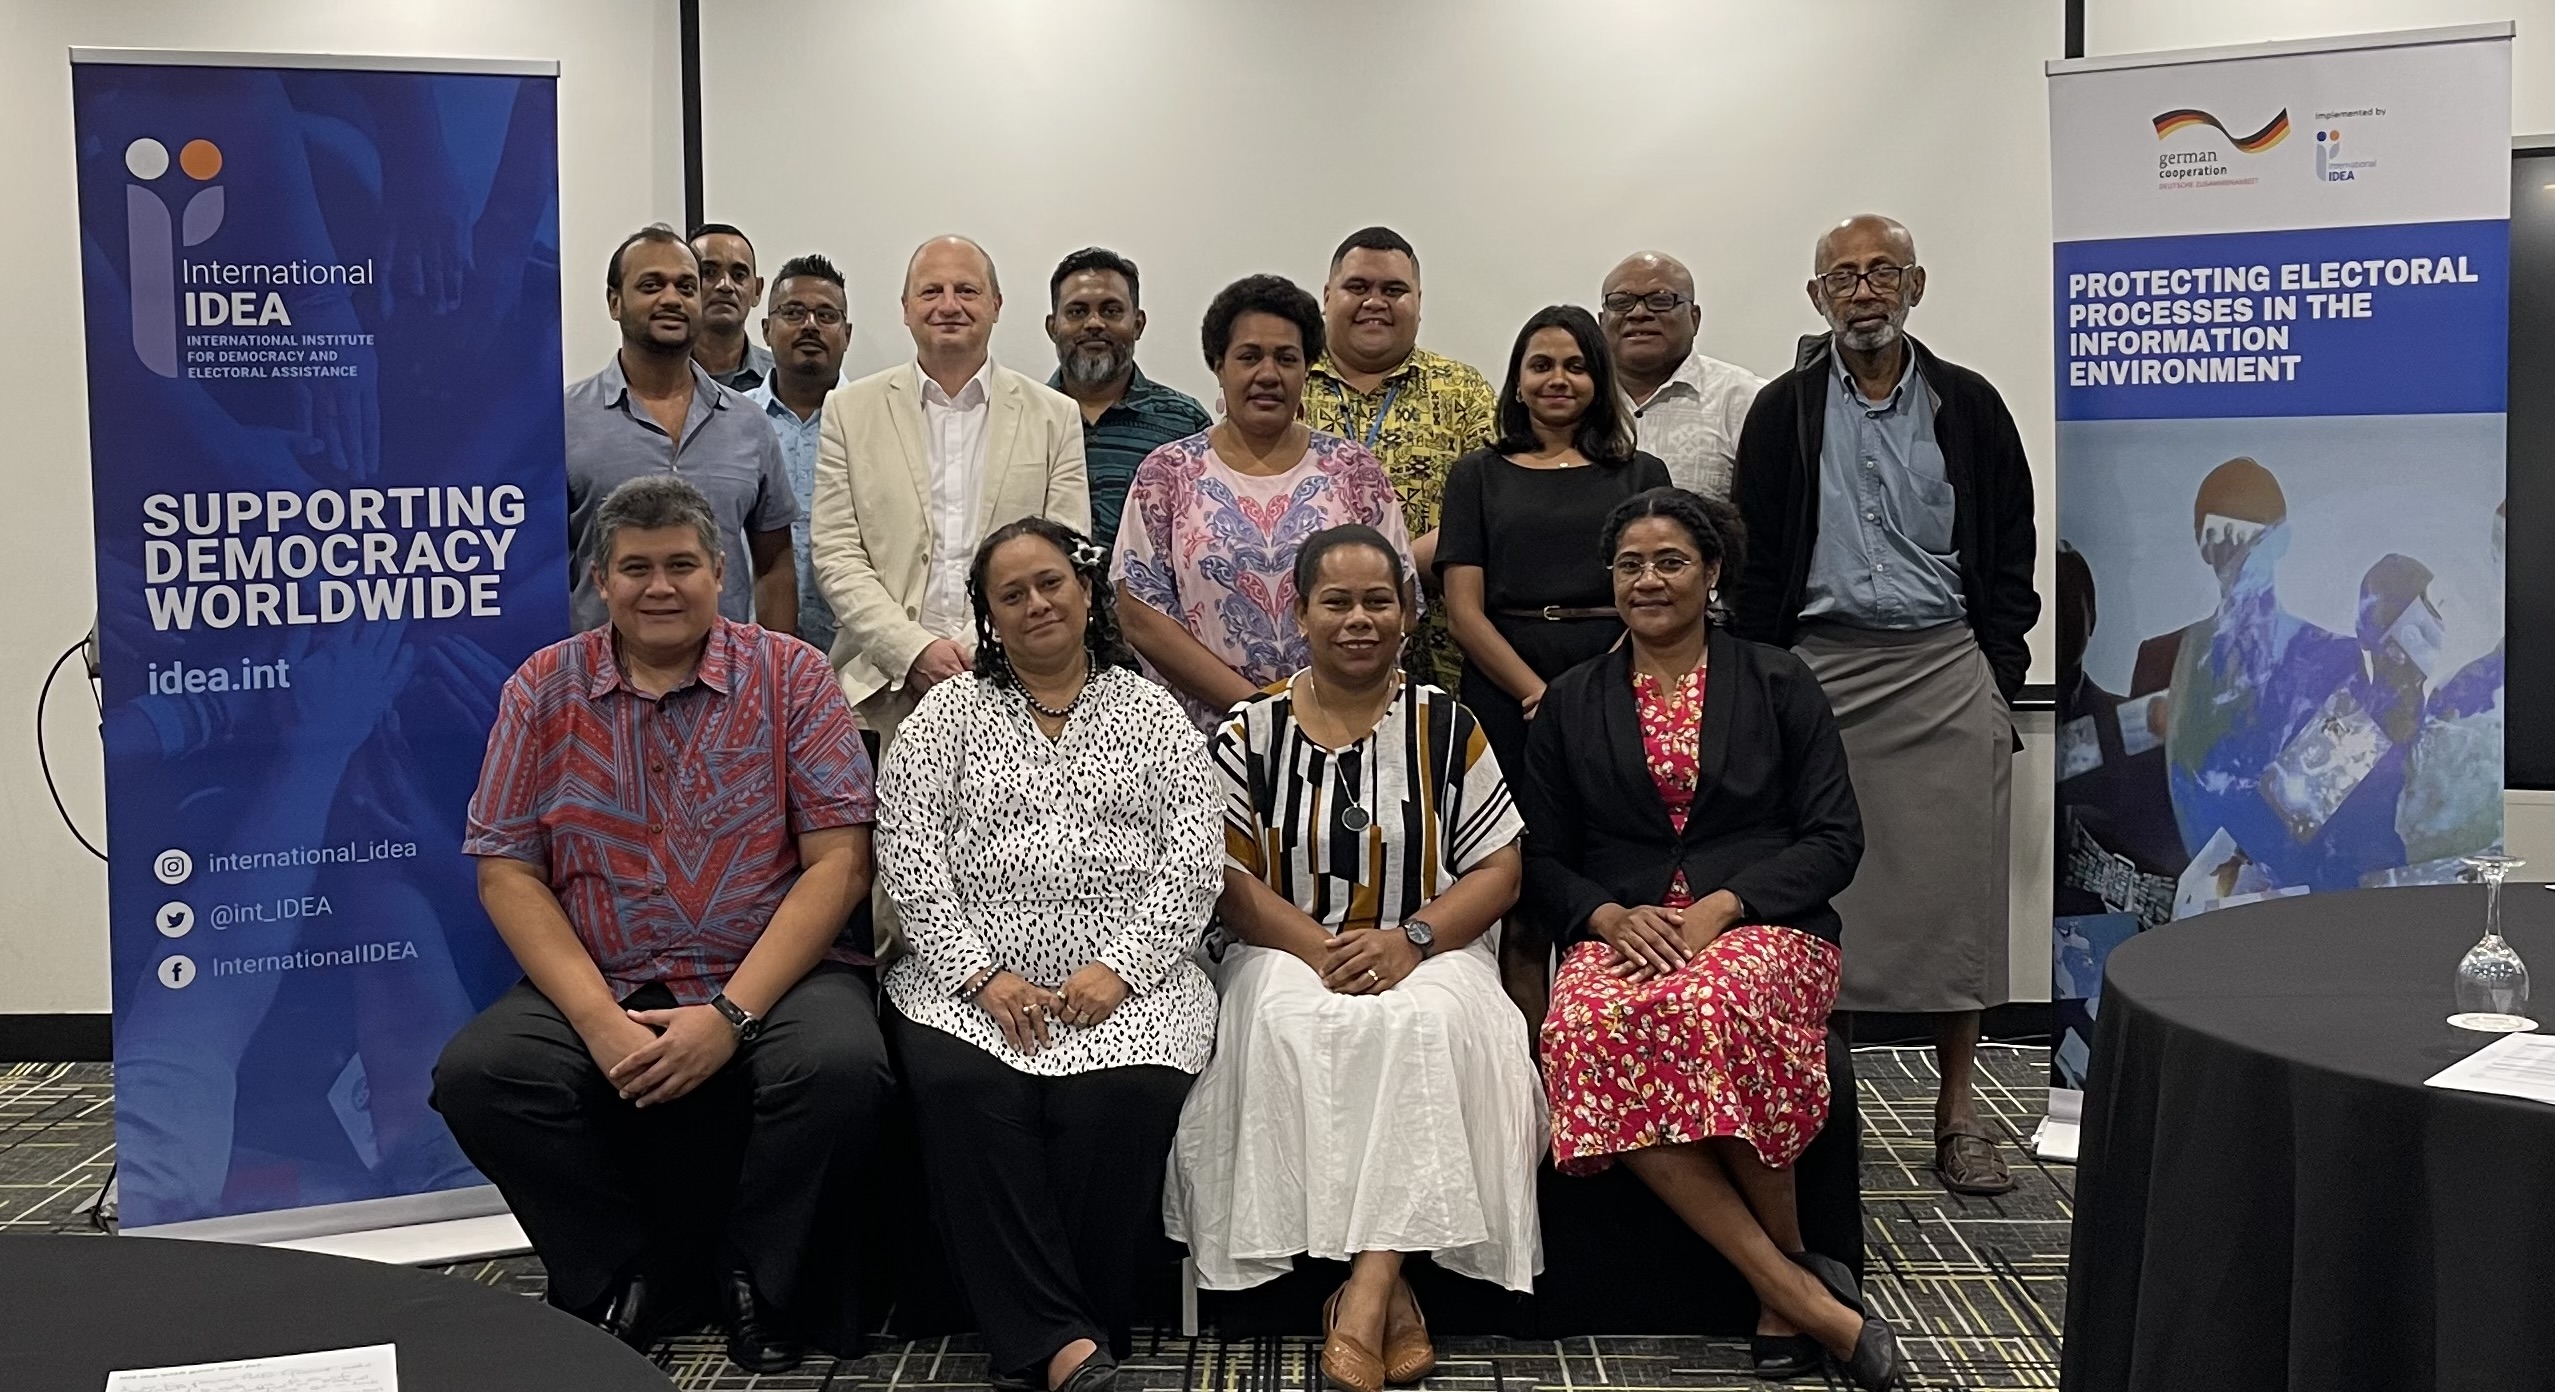 Participants at the two-day Roadmap Workshop about the information environment around elections in Fiji.